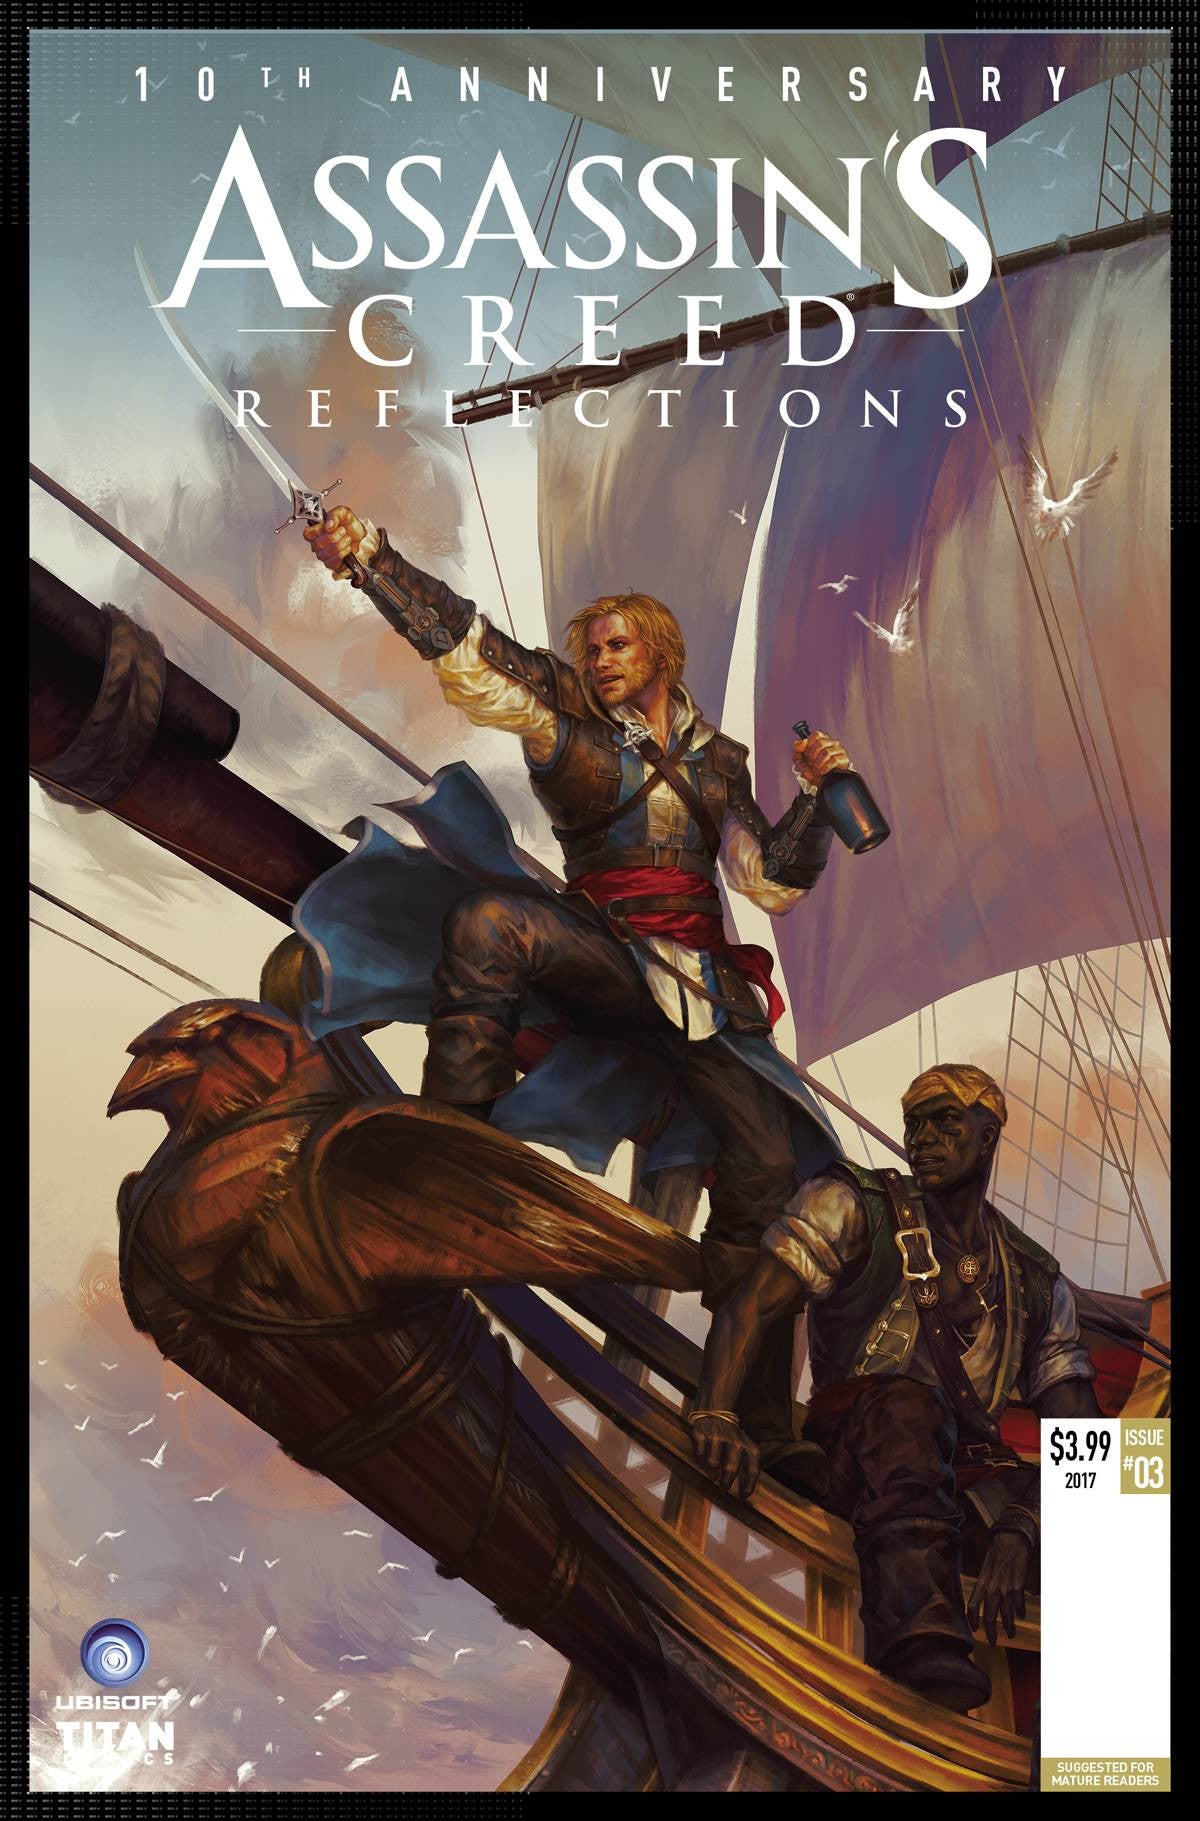 ASSASSINS CREED REFLECTIONS #3 (OF 4) CVR A SUNSET AGAIN (MR) COVER